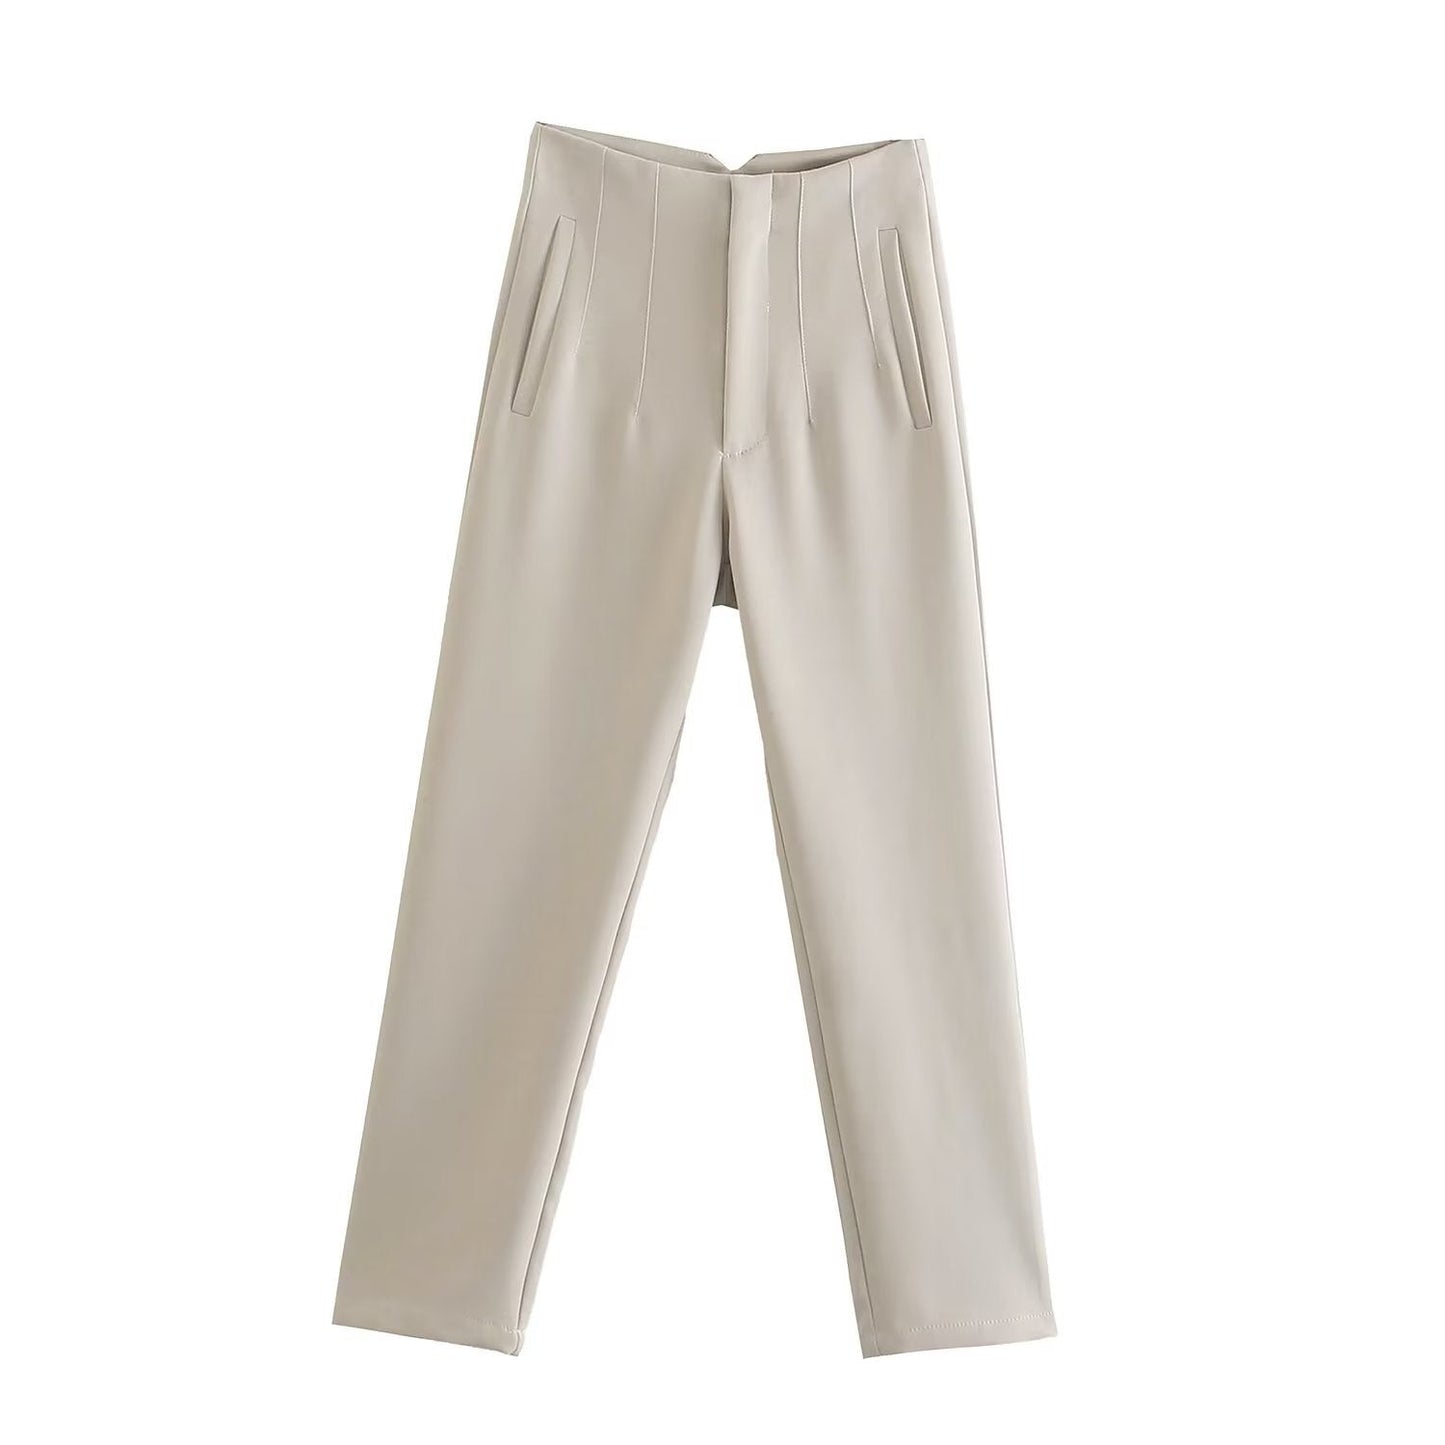 Tailored Pleat High Waist Pants - Buy two and get free shipping! mysite